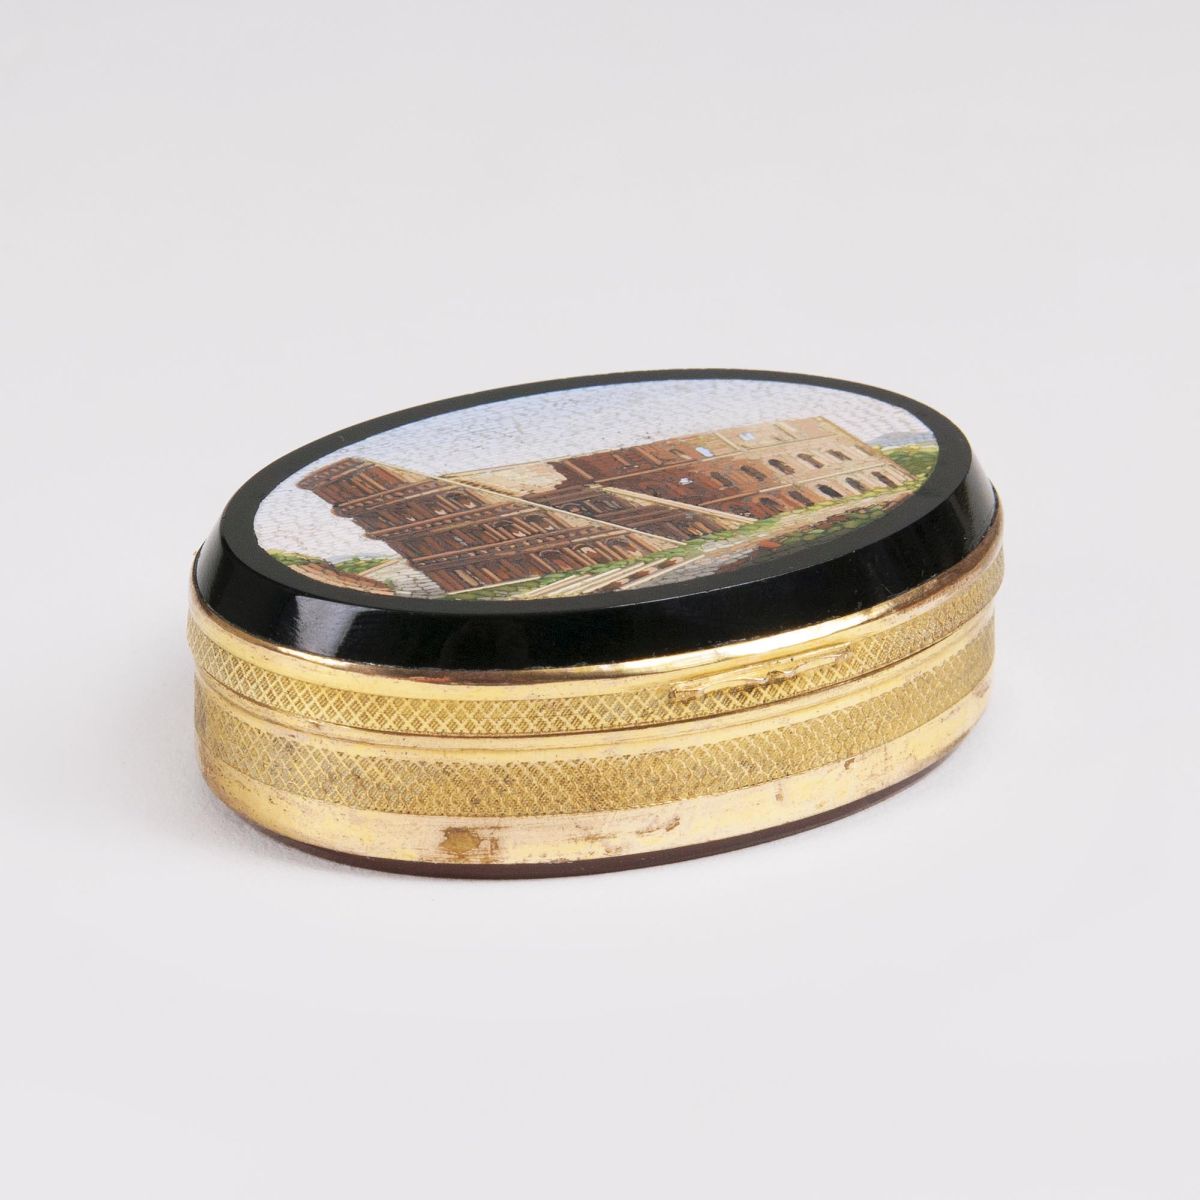 An Oval Box with Micromosaic 'Colosseum'